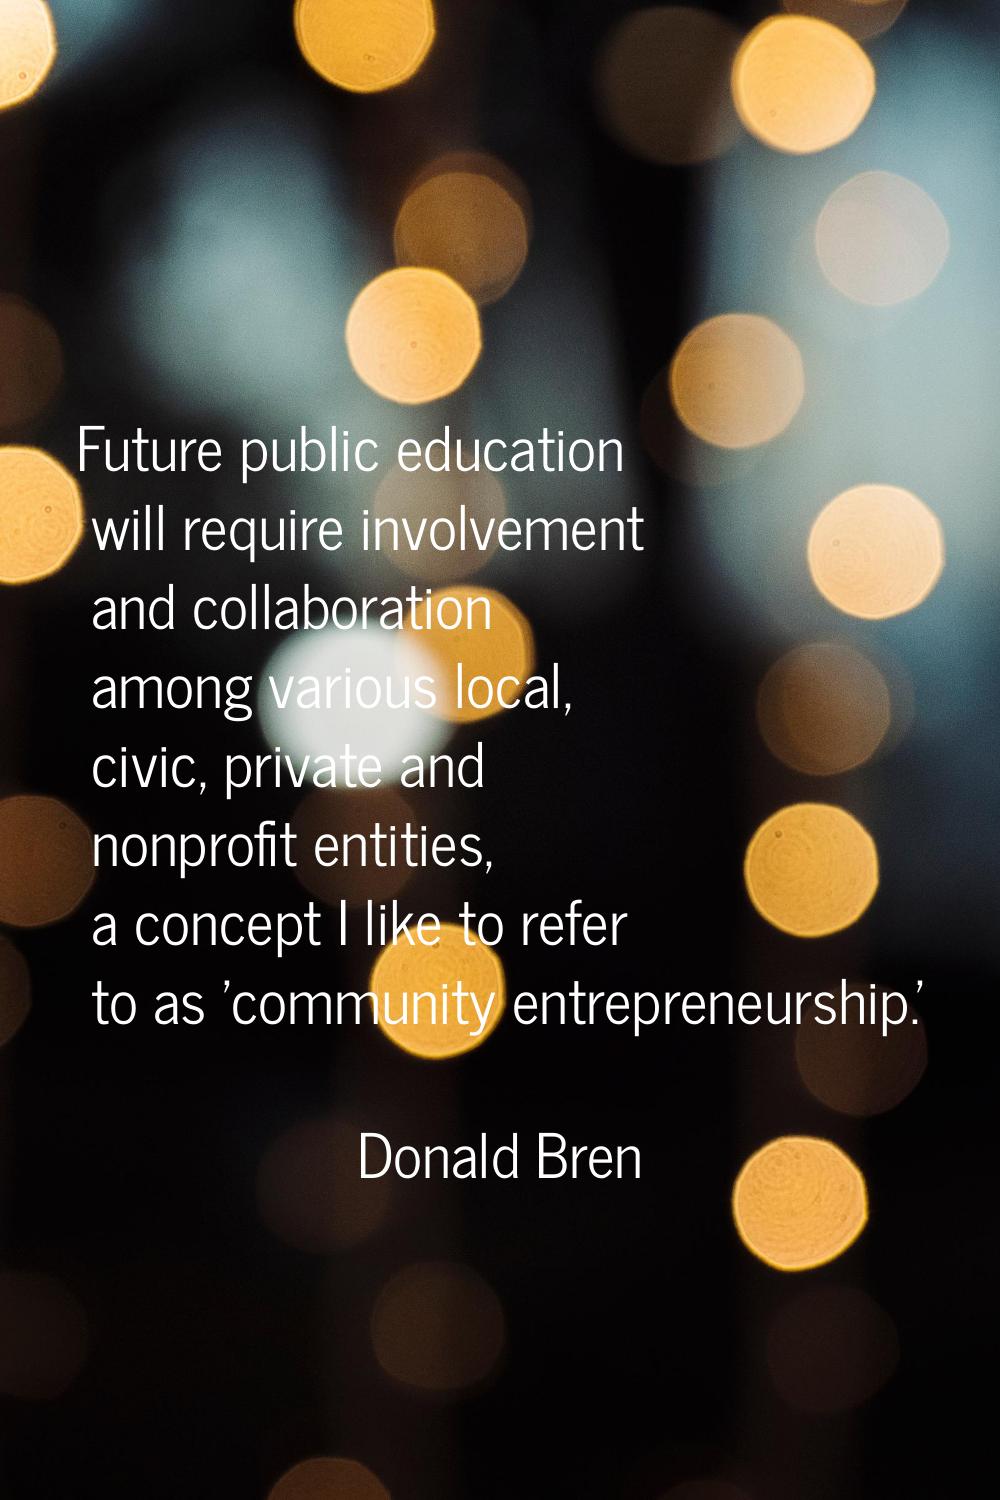 Future public education will require involvement and collaboration among various local, civic, priv